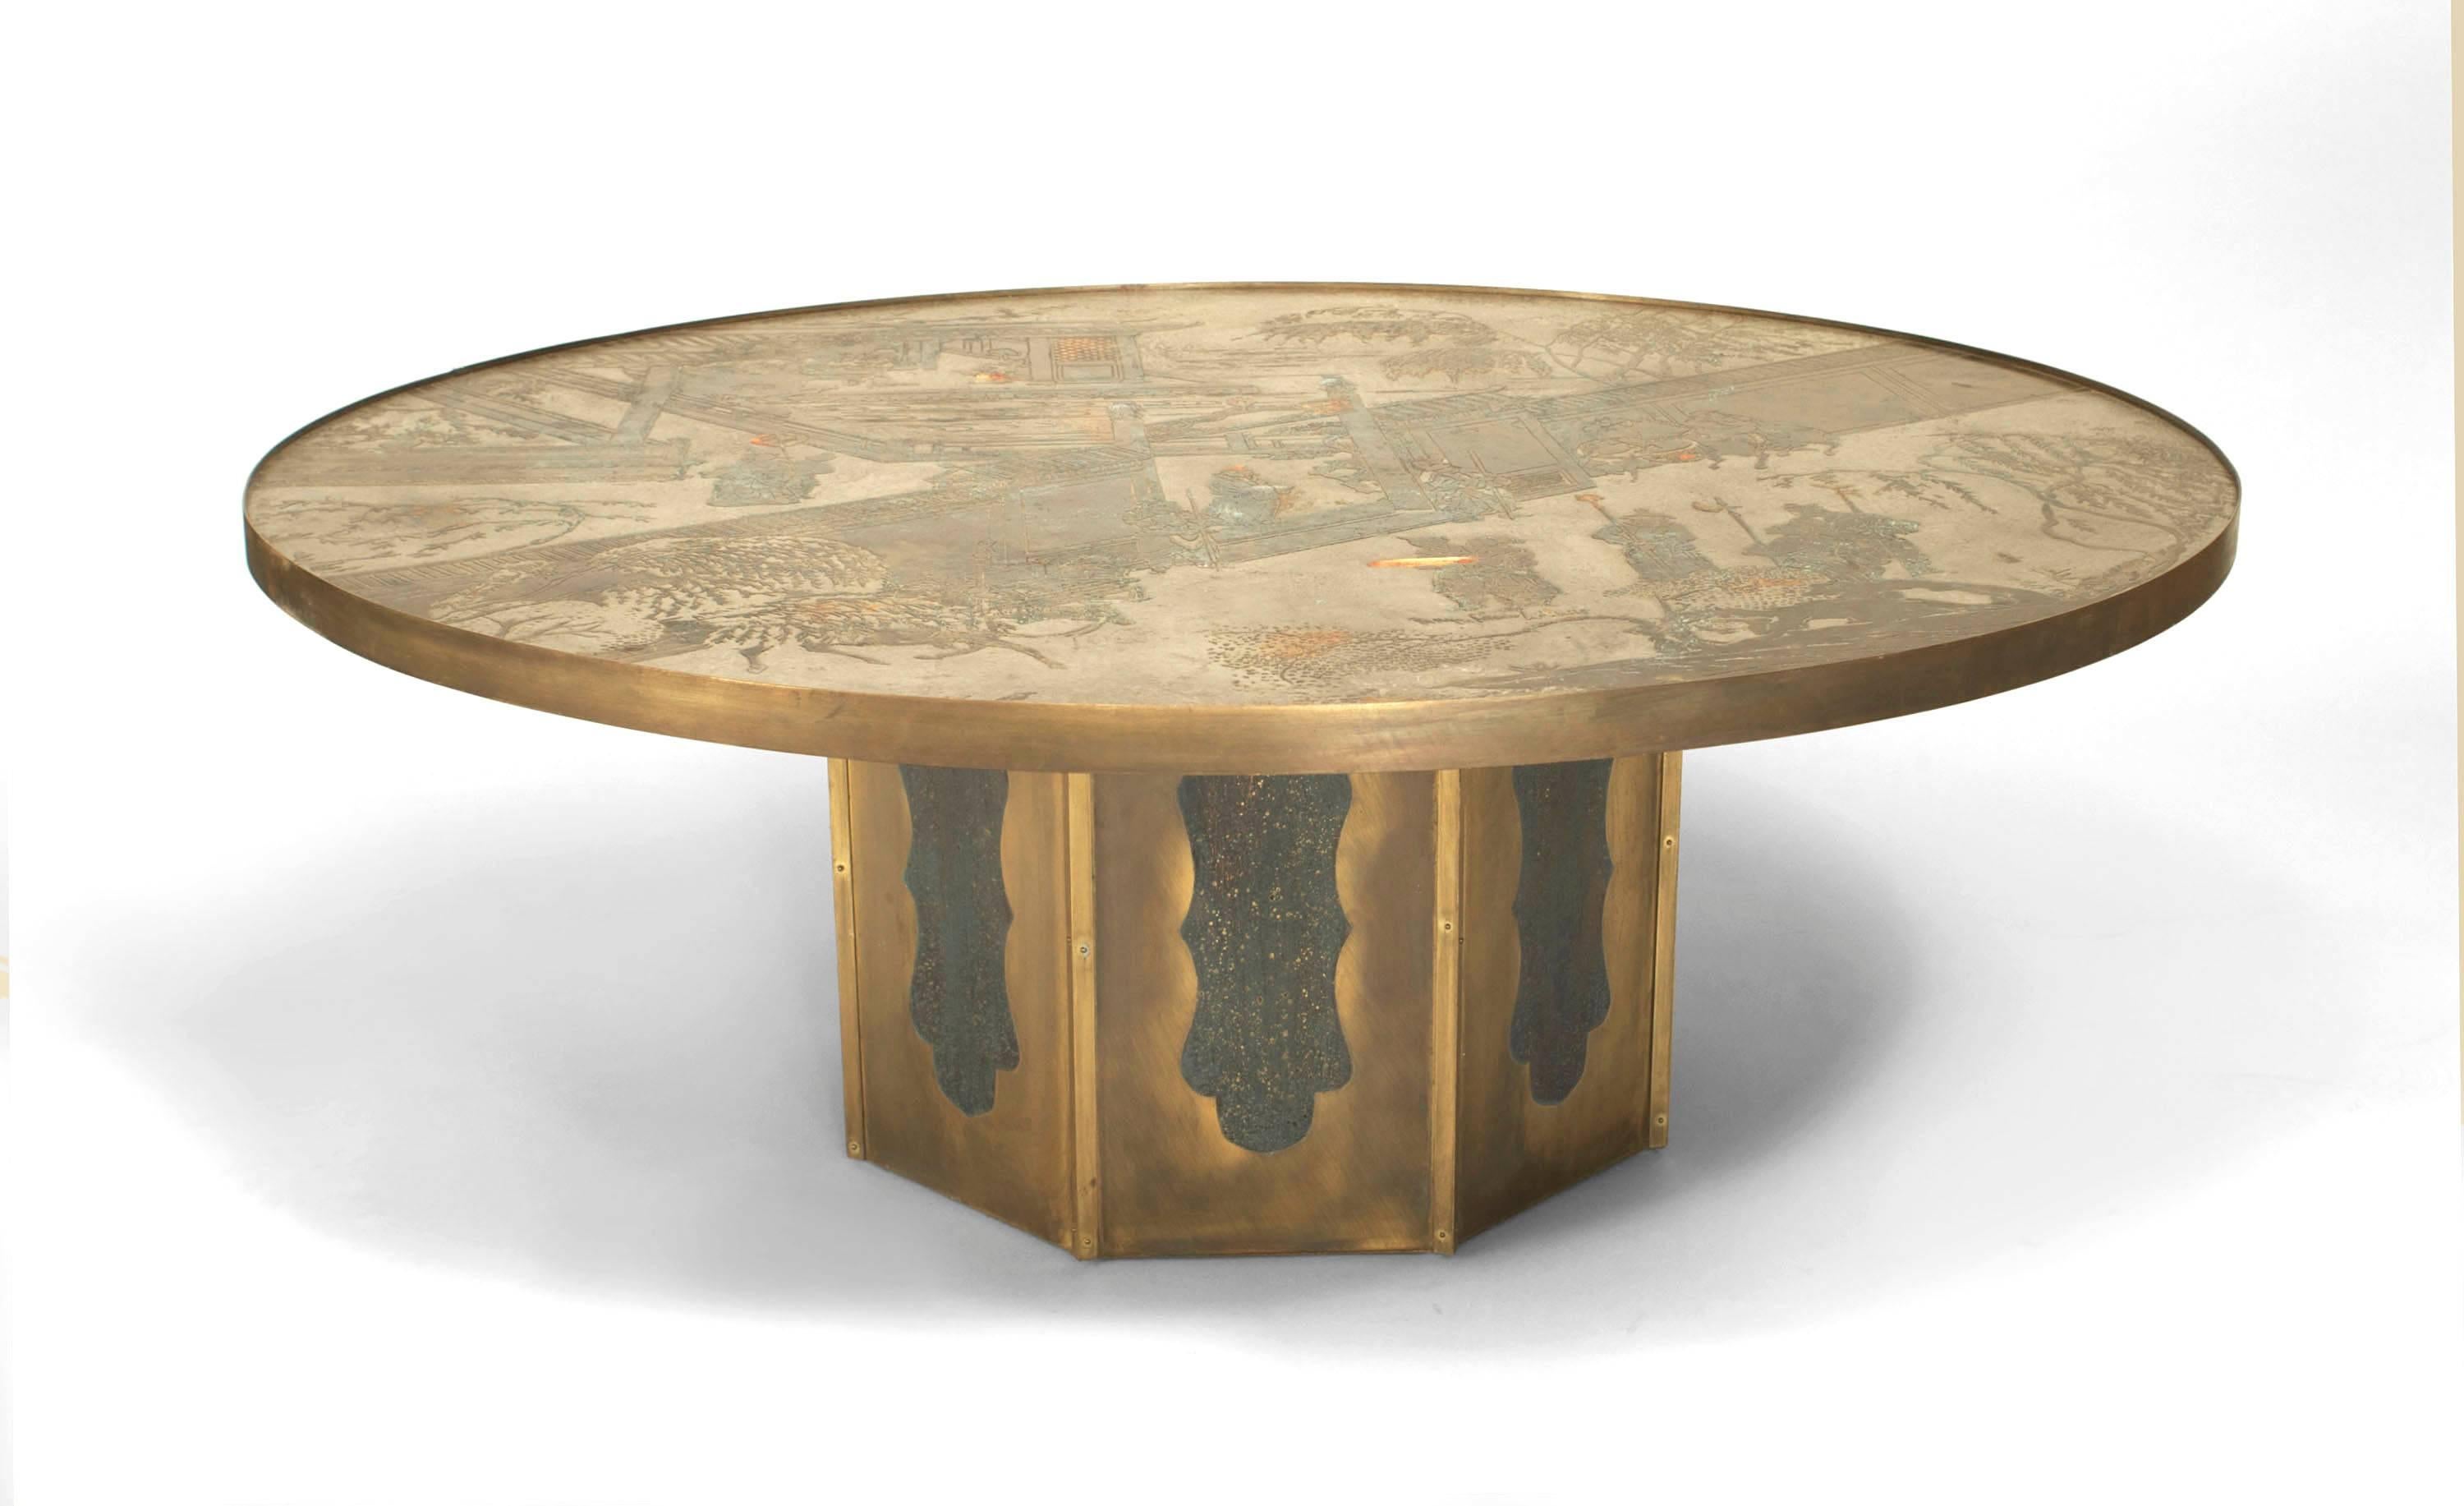 Signed by American father and son designers Philip and Kelvin LaVerne, this 1980's coffee table is composed of patinated bronze and features an octagonal base beneath a circular top etched with chinoiserie motifs.